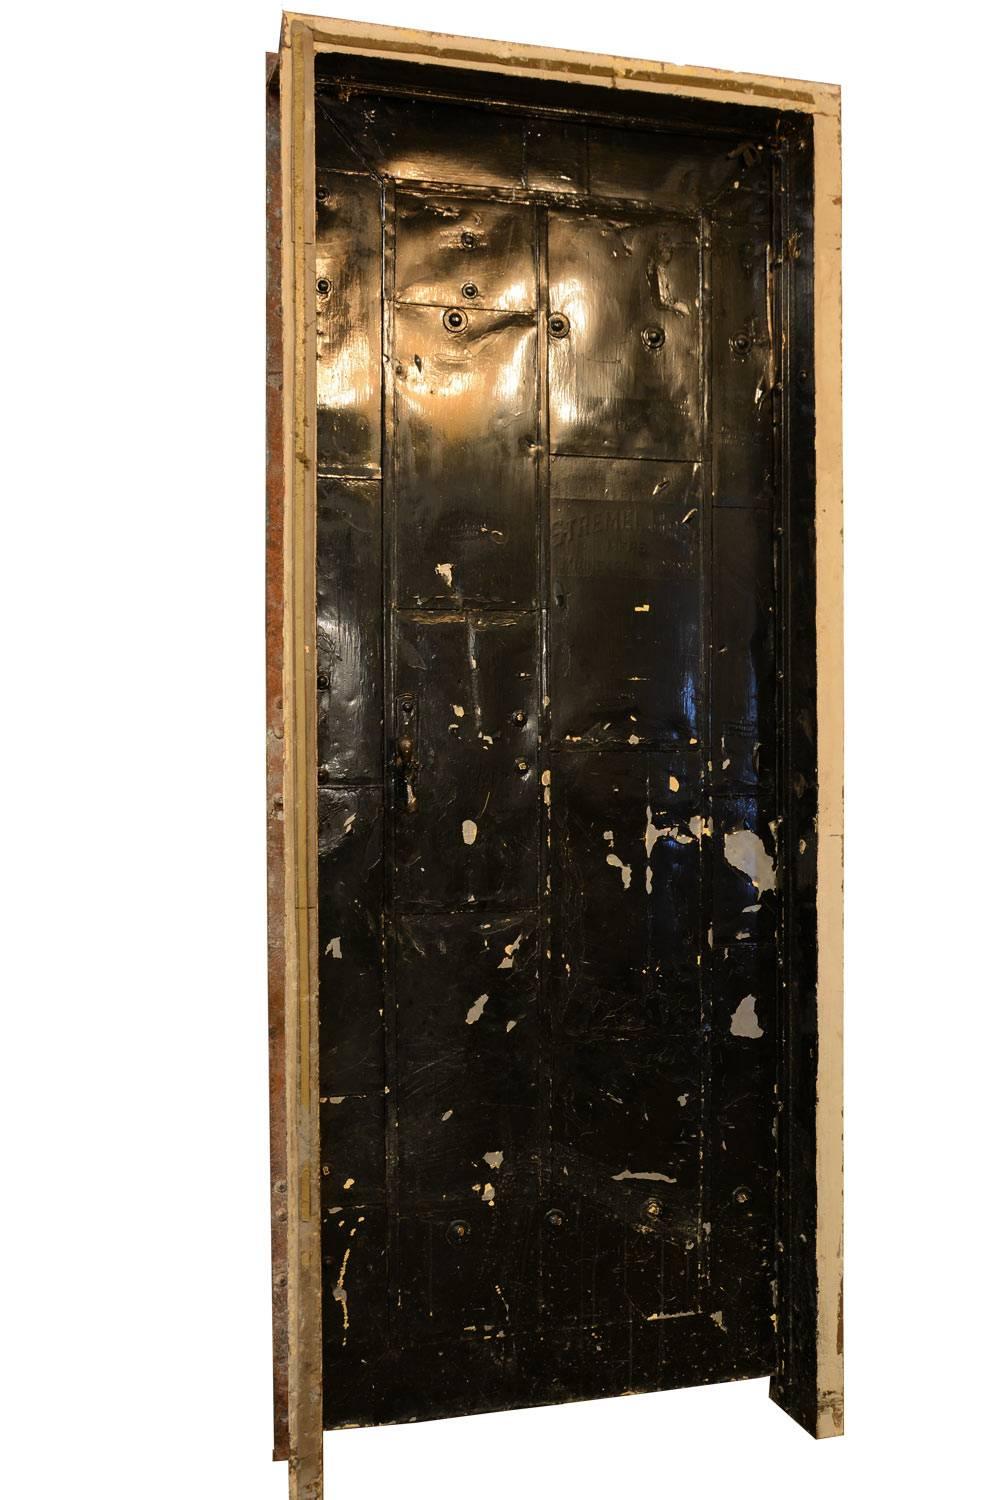 Heavy duty black, metal clad fire door produced by Stremel Bros. in Minneapolis, circa 1920s. Complete with original strap hinges, latch system and iron frame for easy installation. 

 